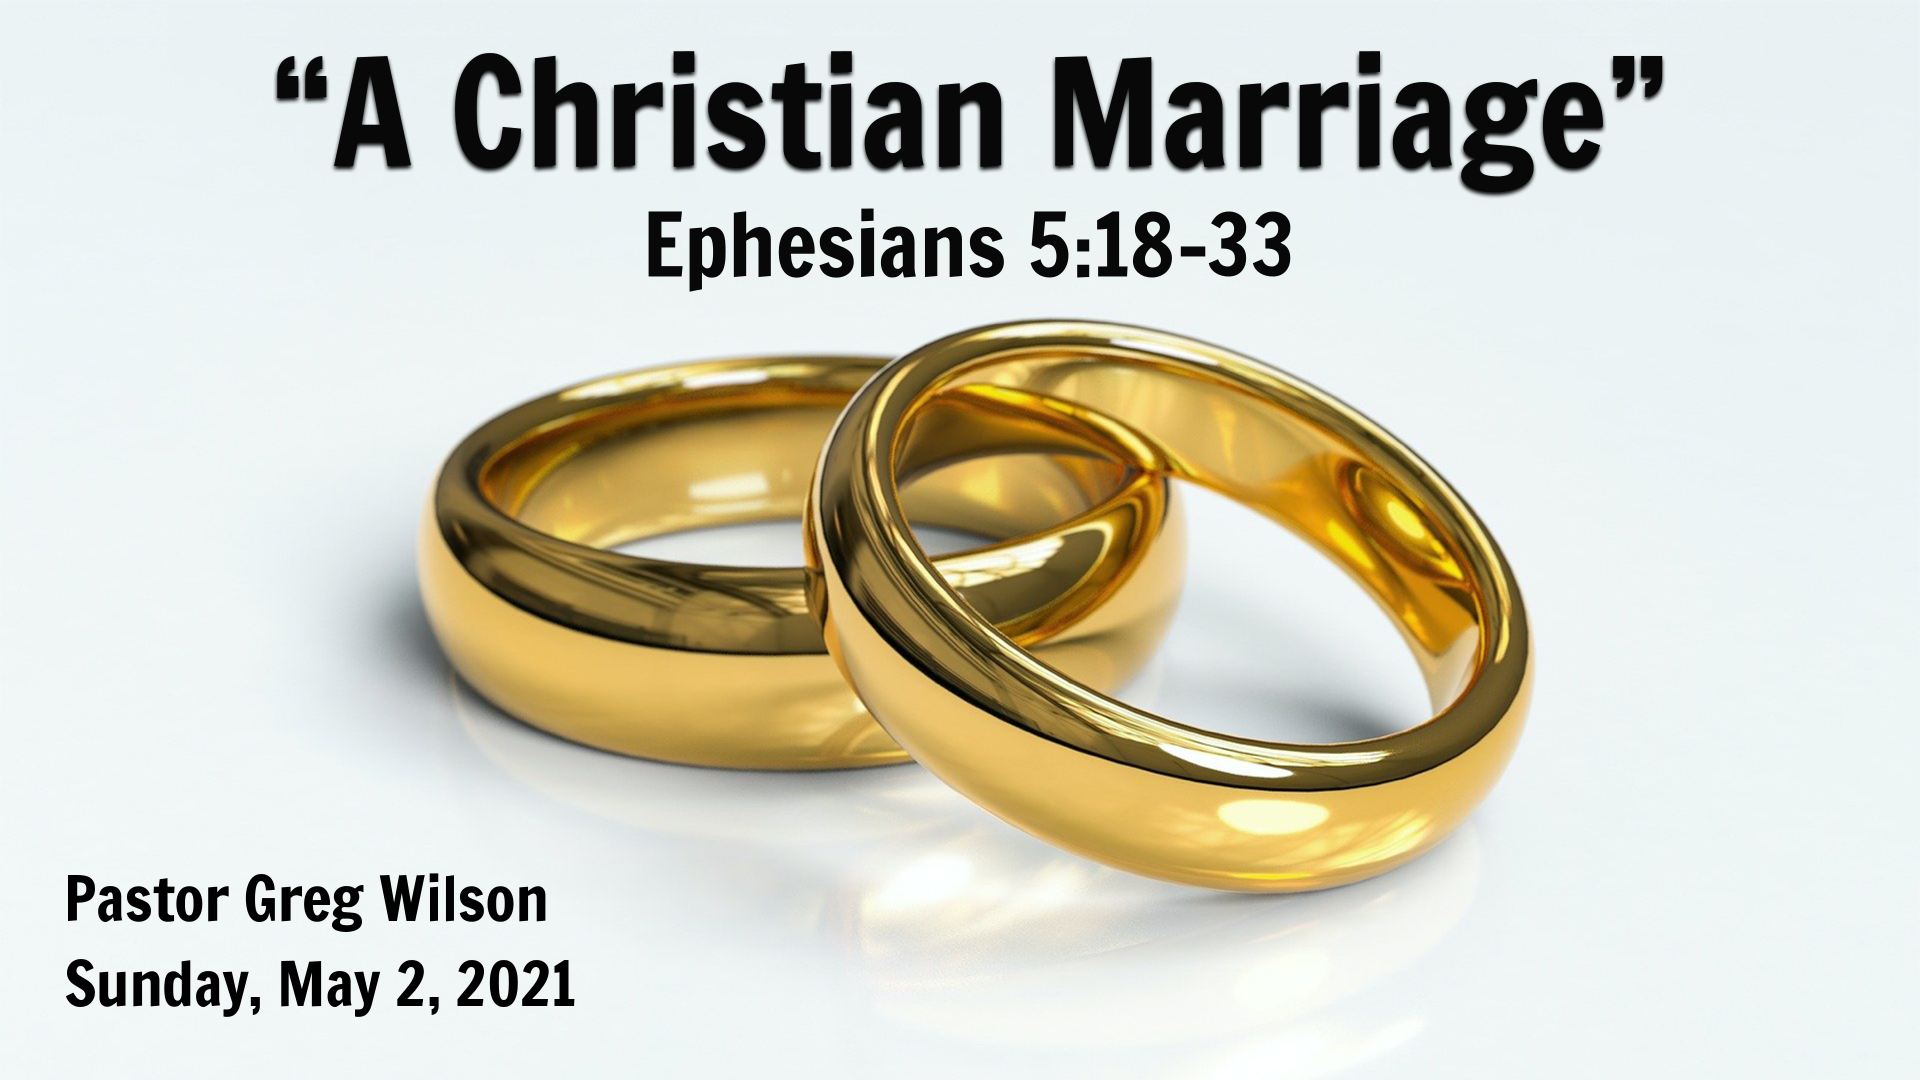 "A Christian Marriage"